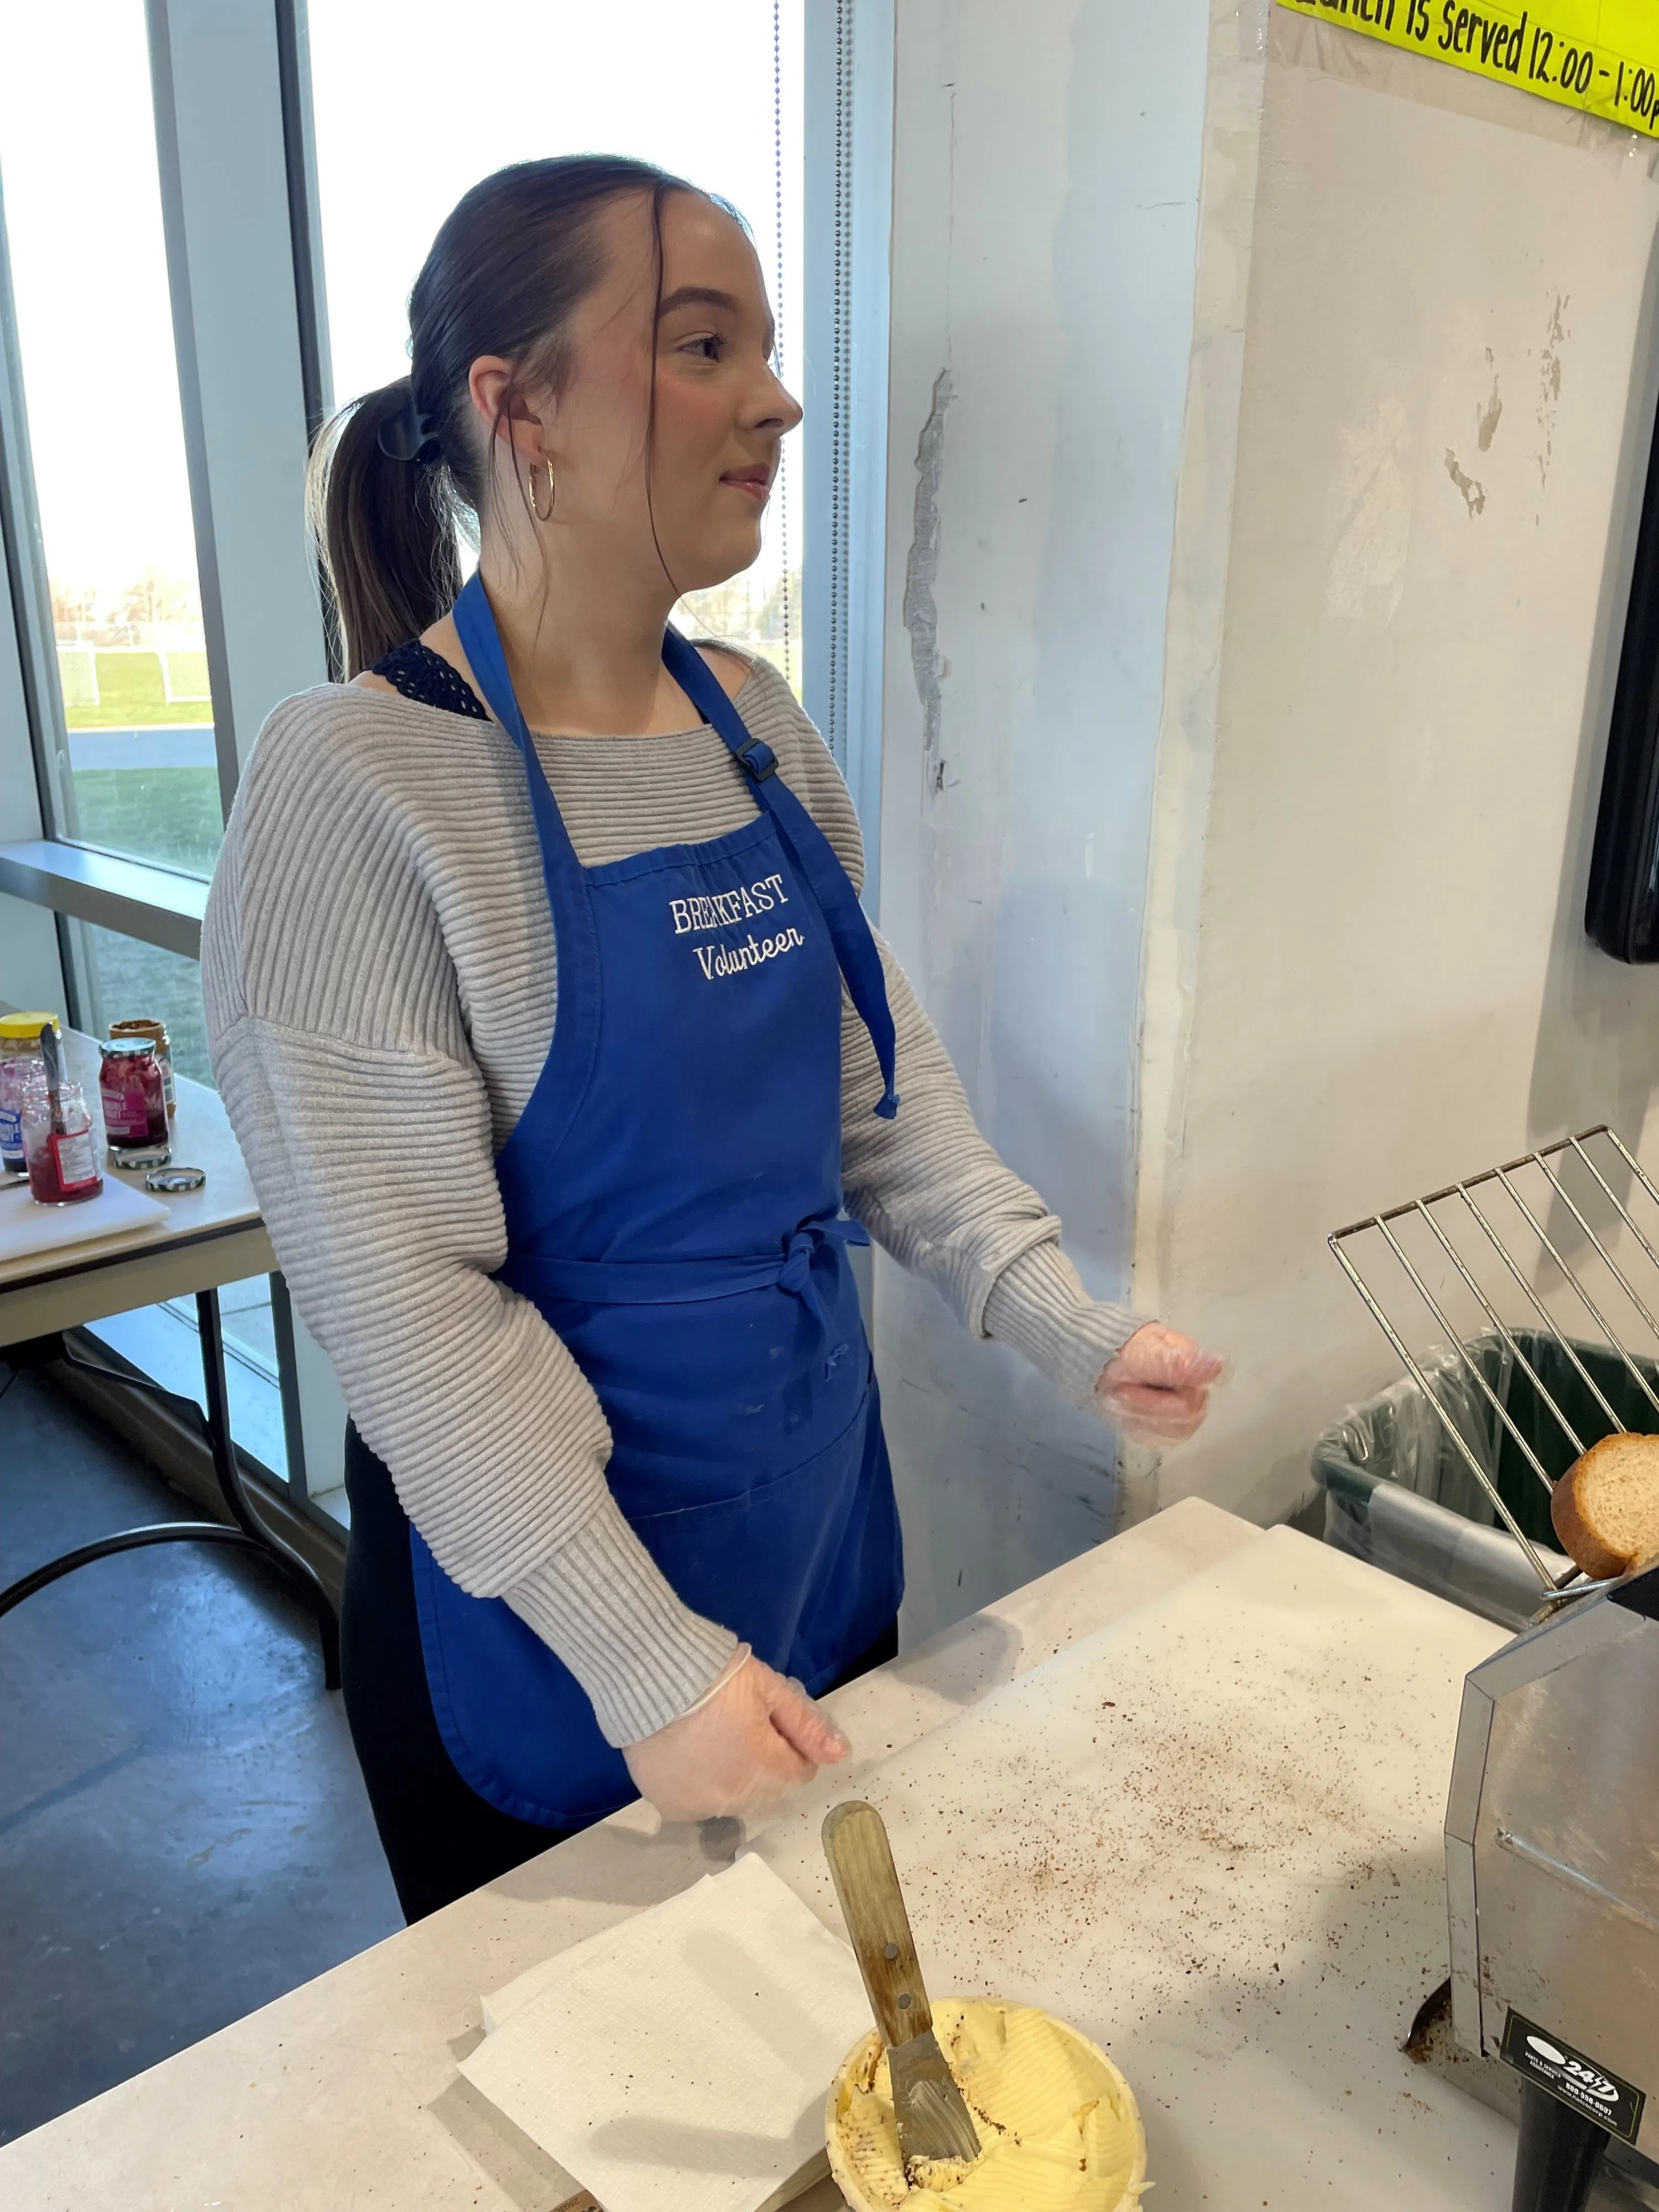 YCMHS student ups breakfast game